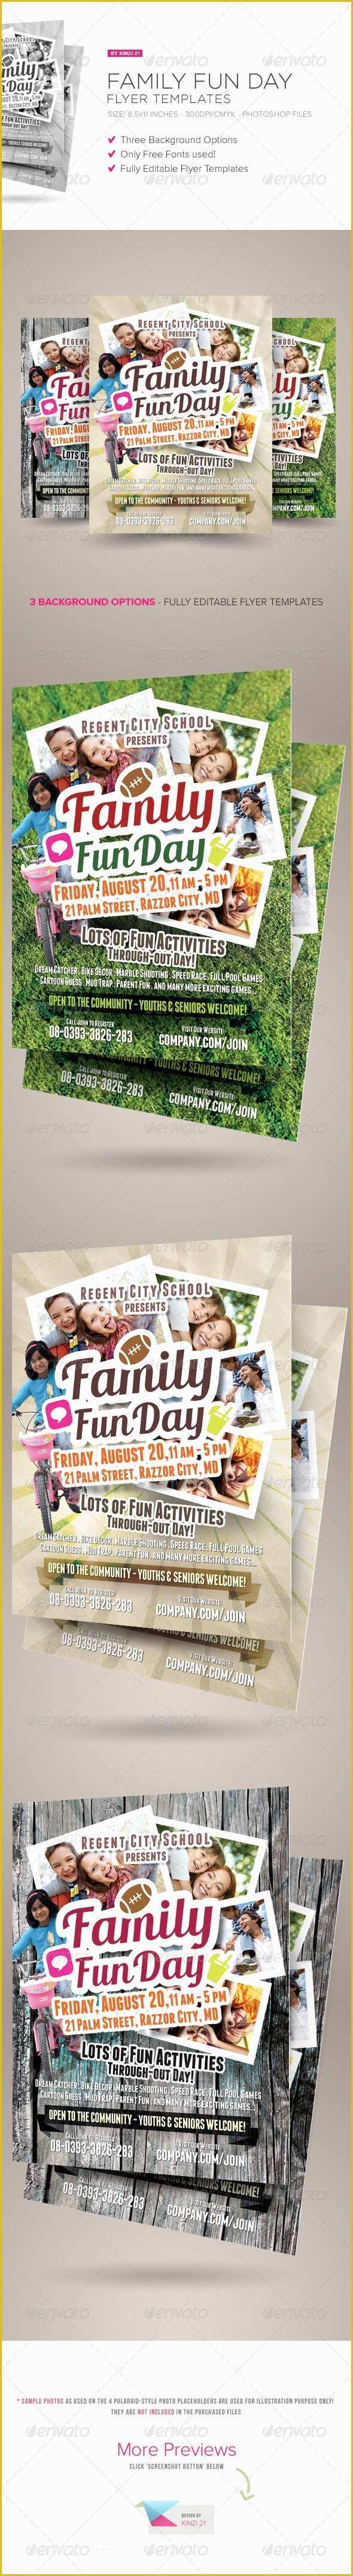 Fun Day Flyer Template Free Of Family Fun Day Flyers